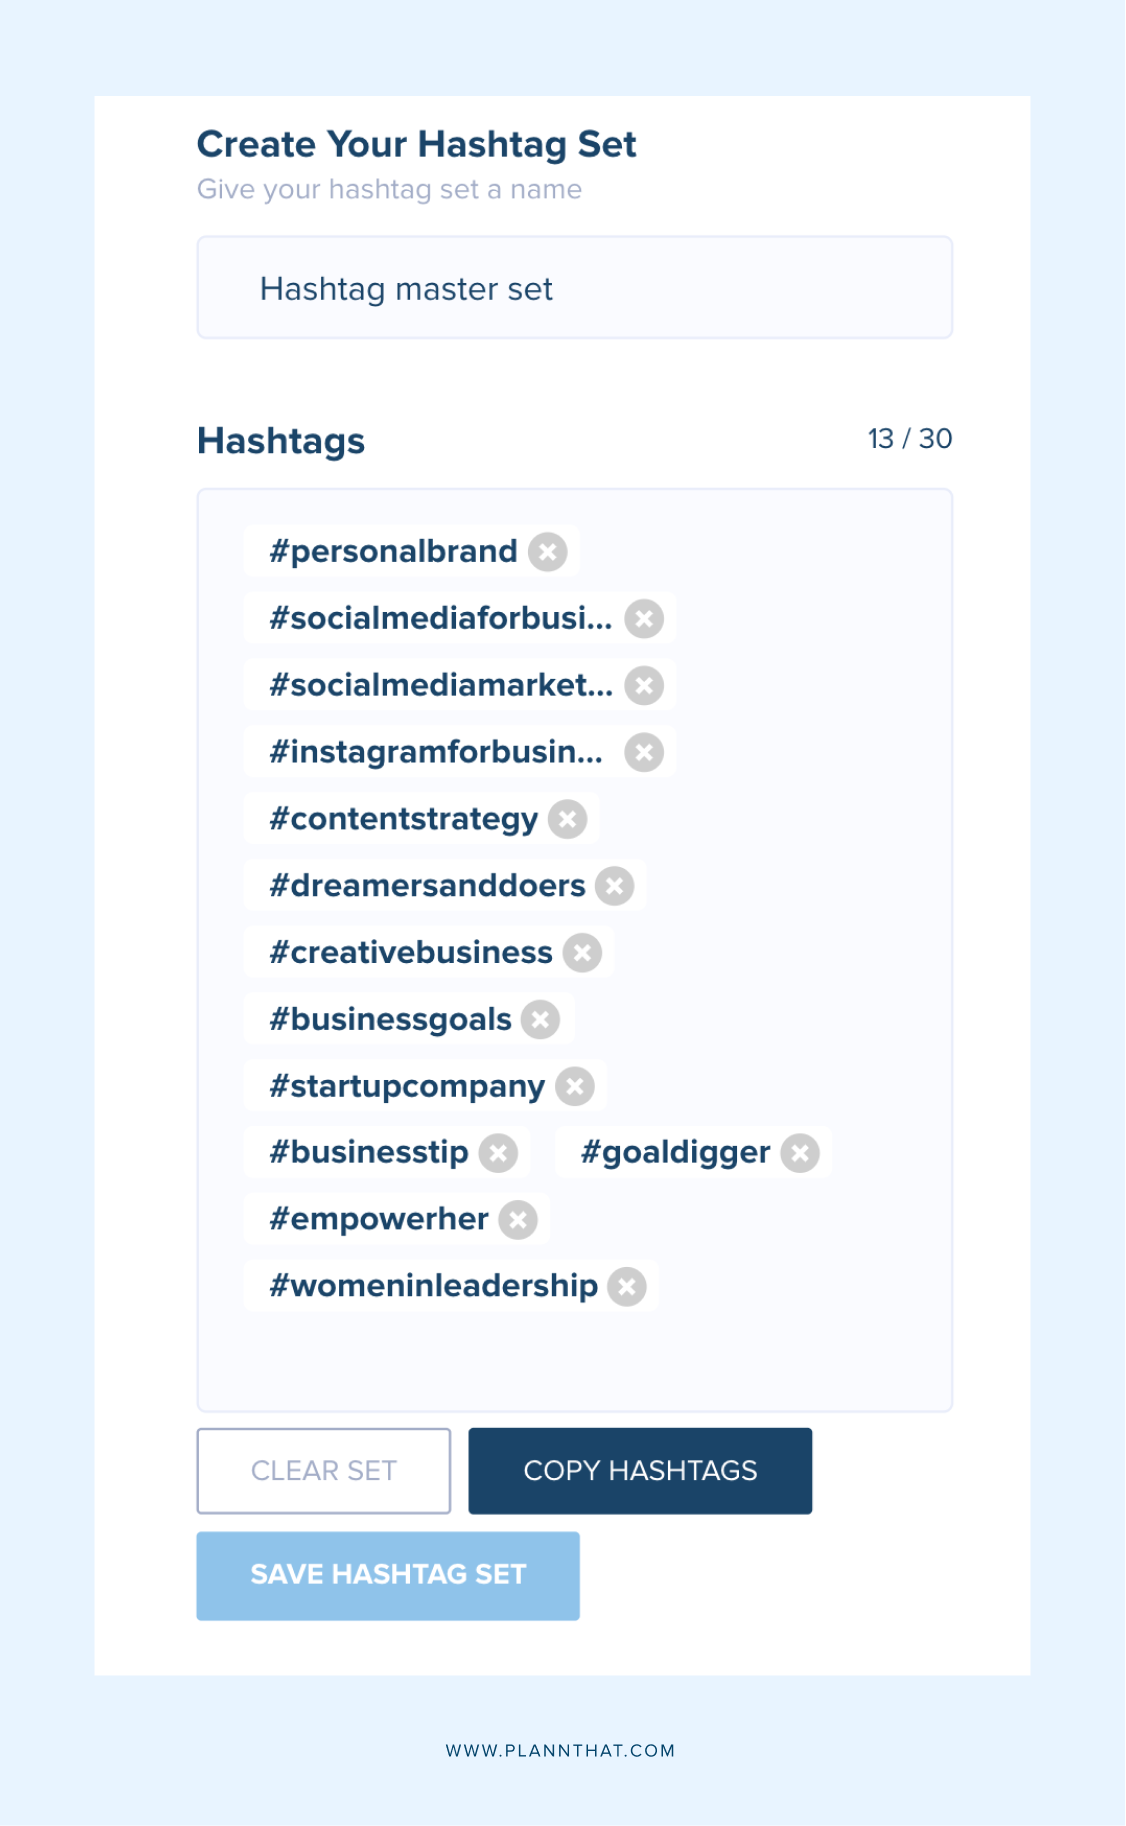 How to save time with hashtag collections